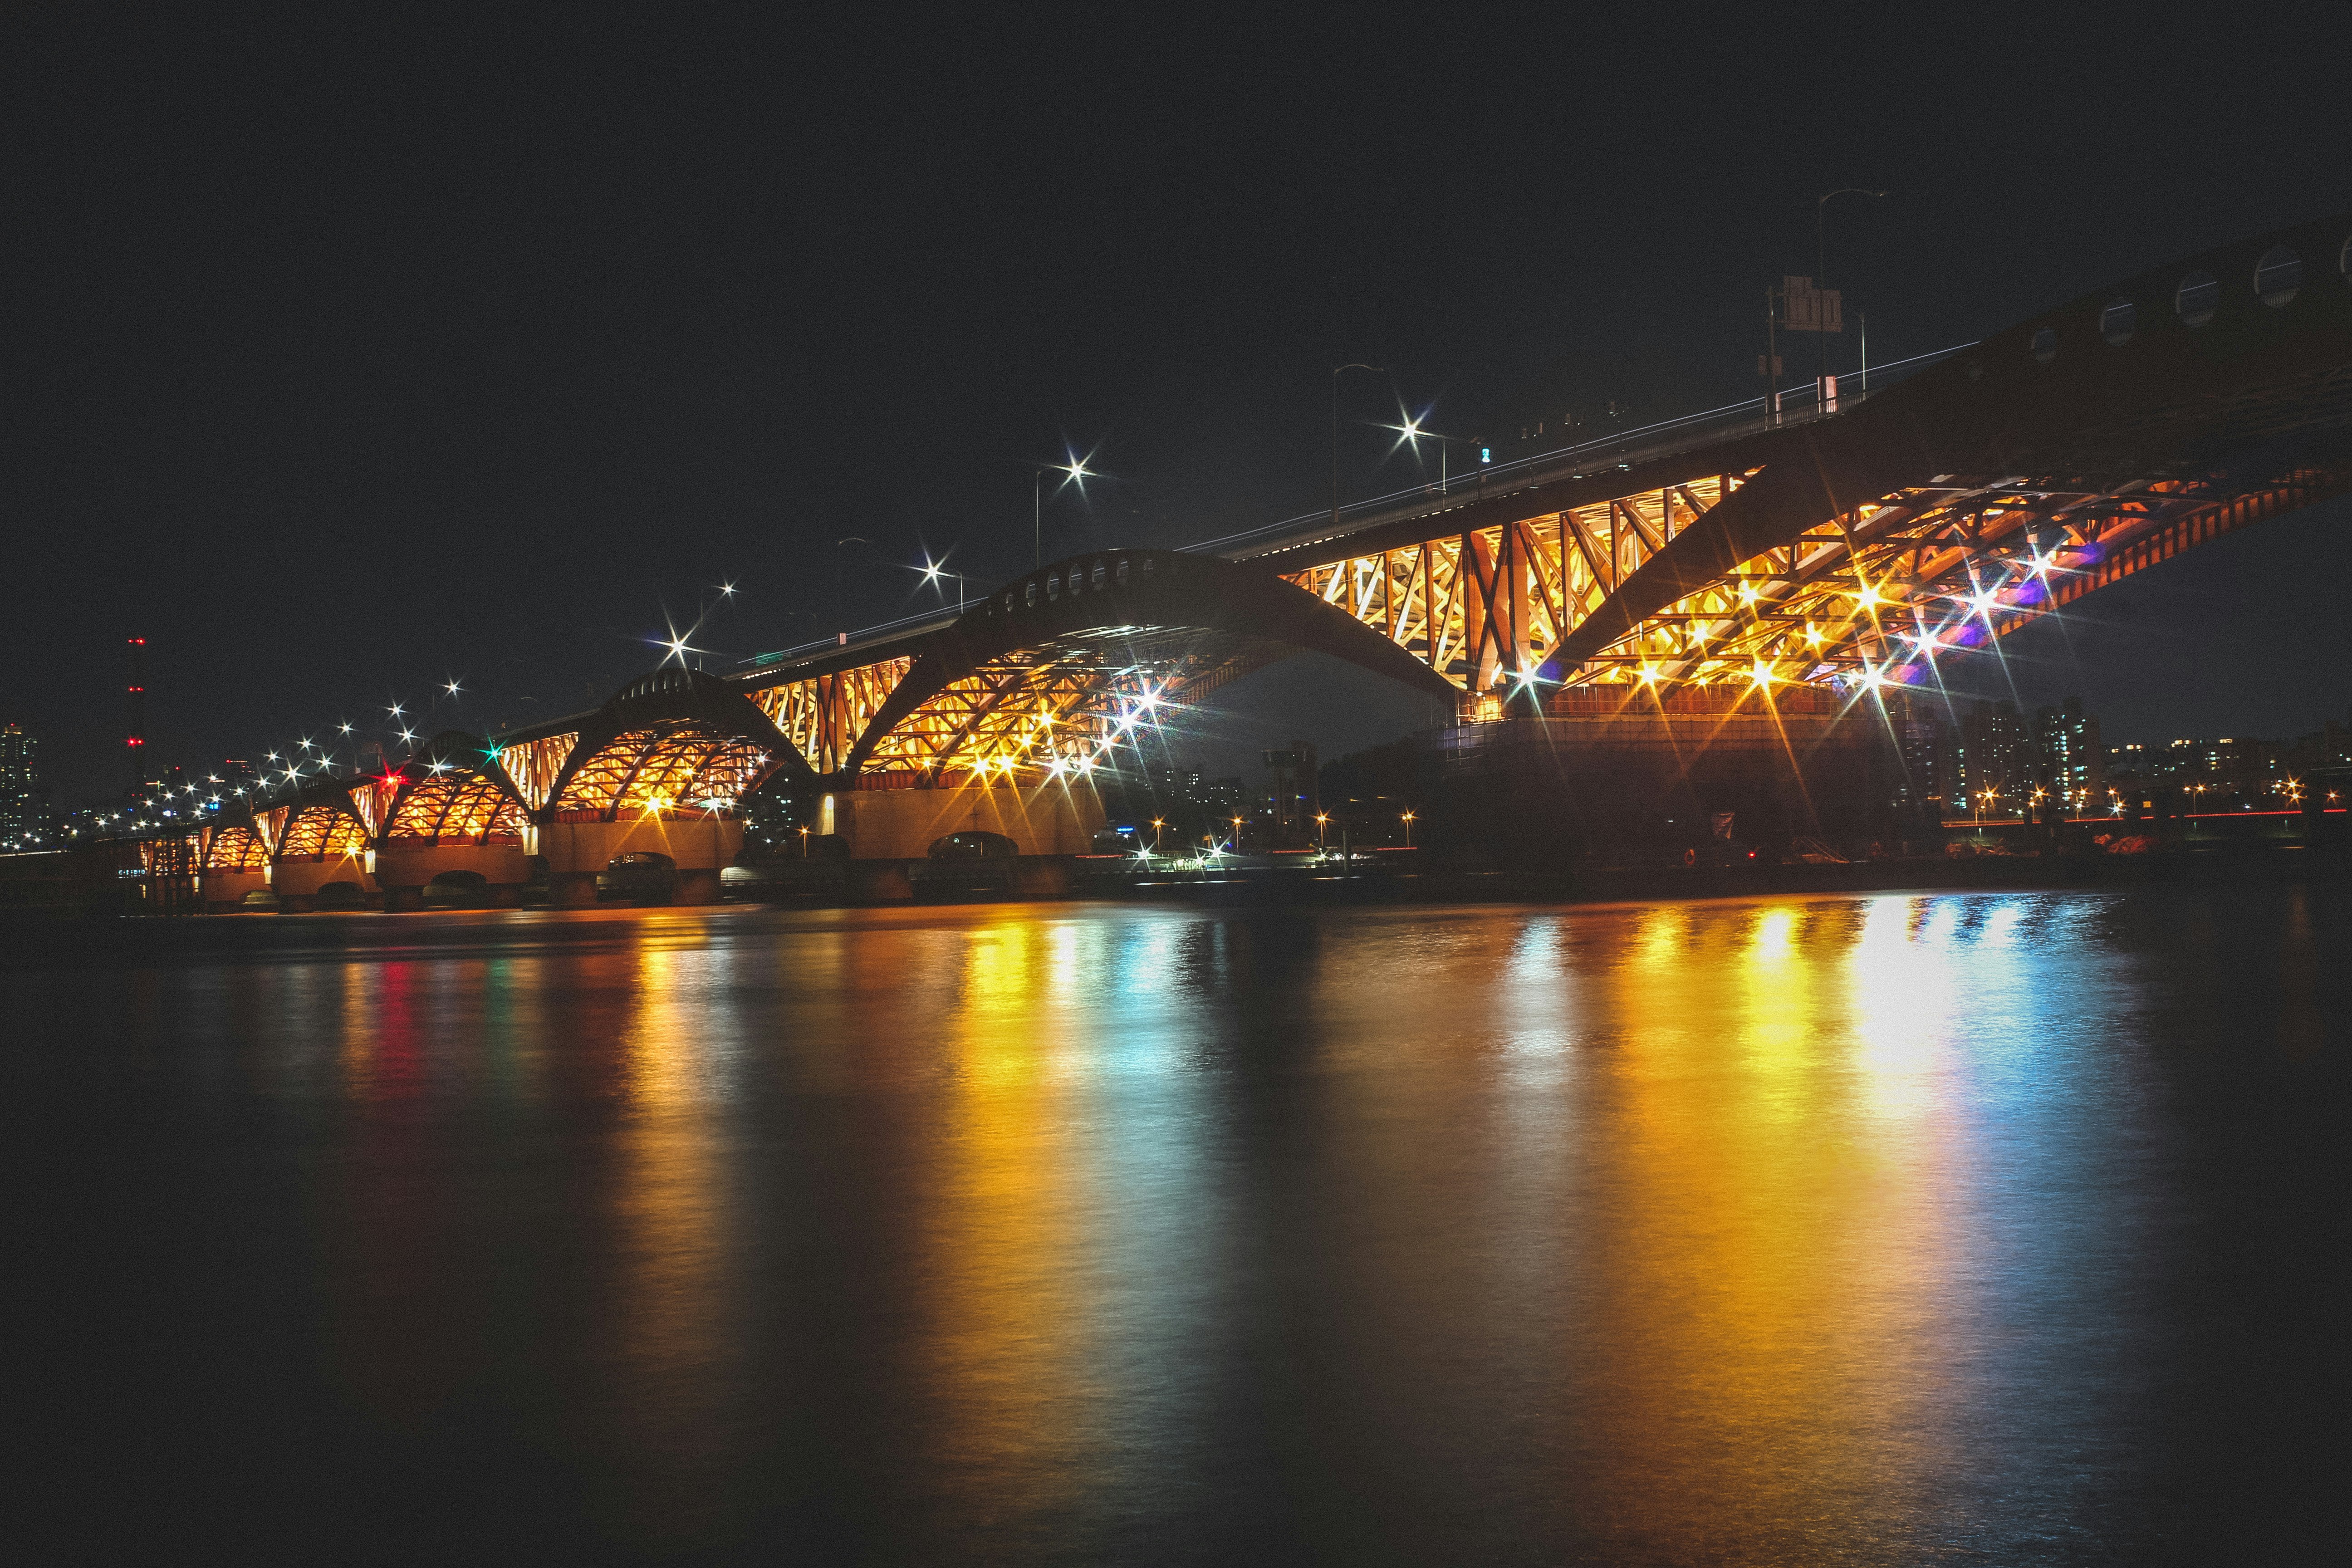 lighted bridge over water during night time